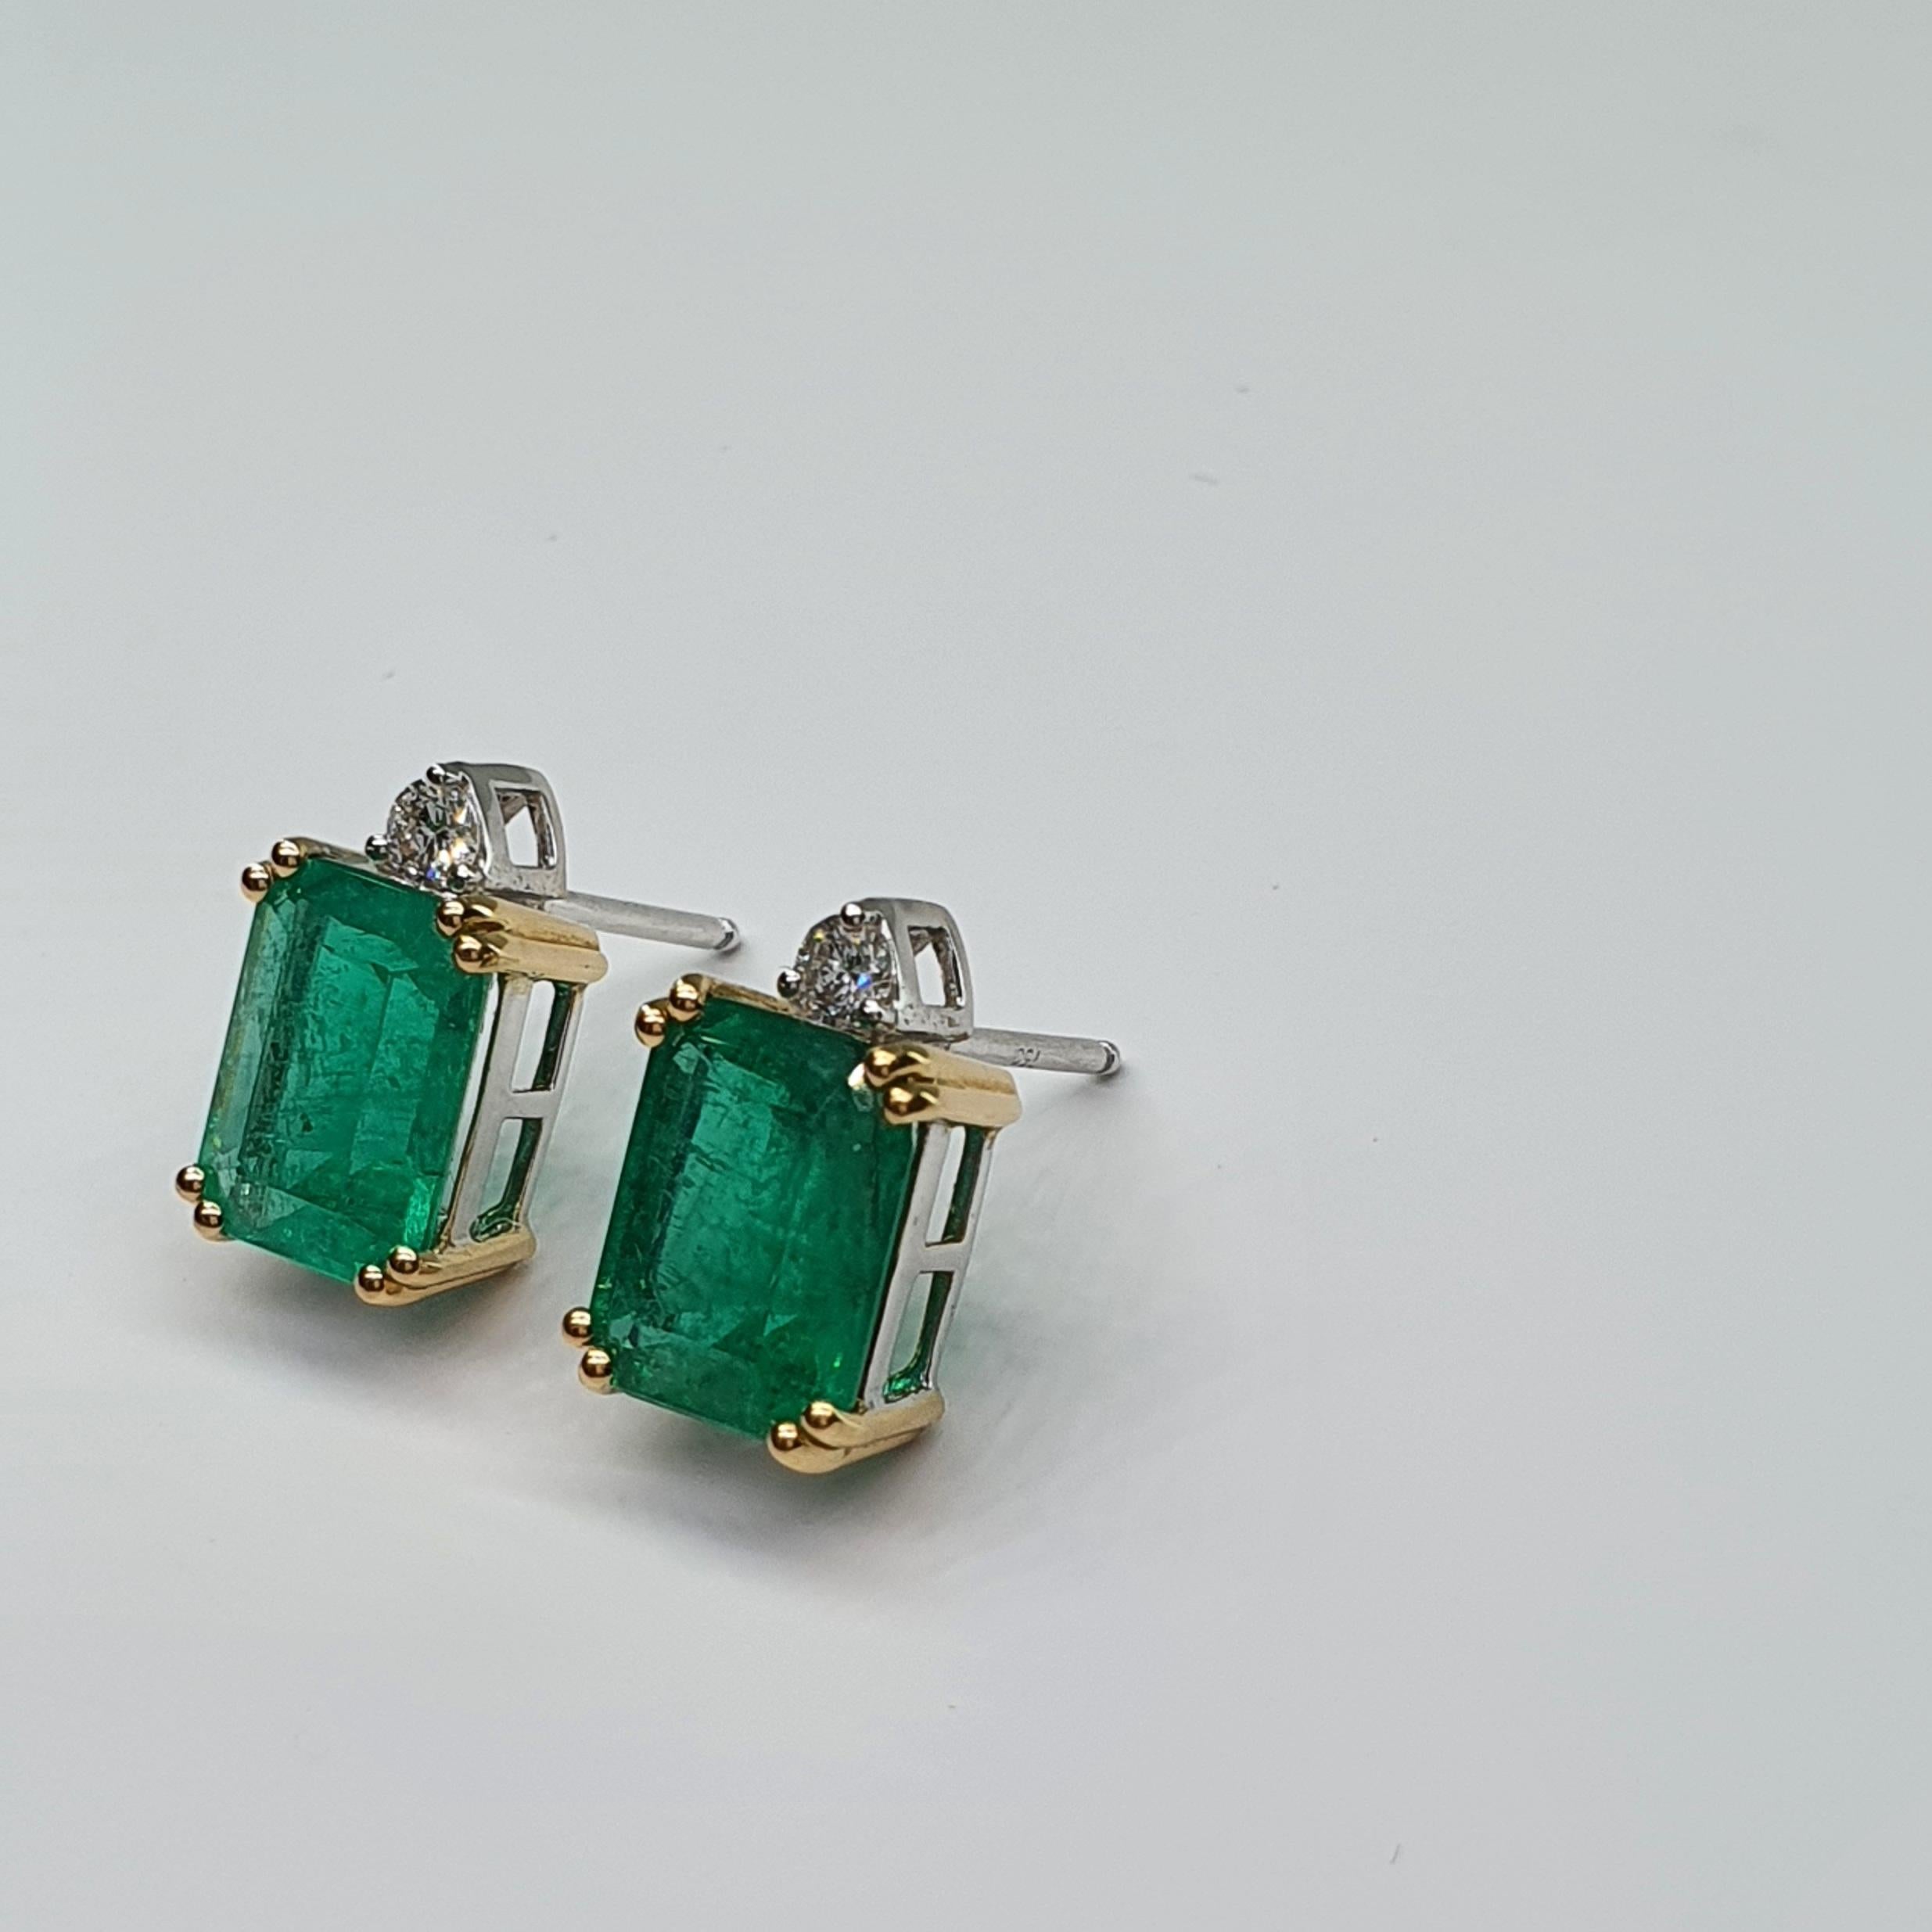 Beautiful pair of 4.89 Carat Natural  Emerald Diamond Stud Earrings 18K White Gold.
Primary Stones: 100% Natural Emeralds
Measurement: 7.5mm x 9.0mm
Total Weight Emeralds: 4.89Cts (2 emeralds)
Shape or Cut : Emerald Cut
Composition: White Gold